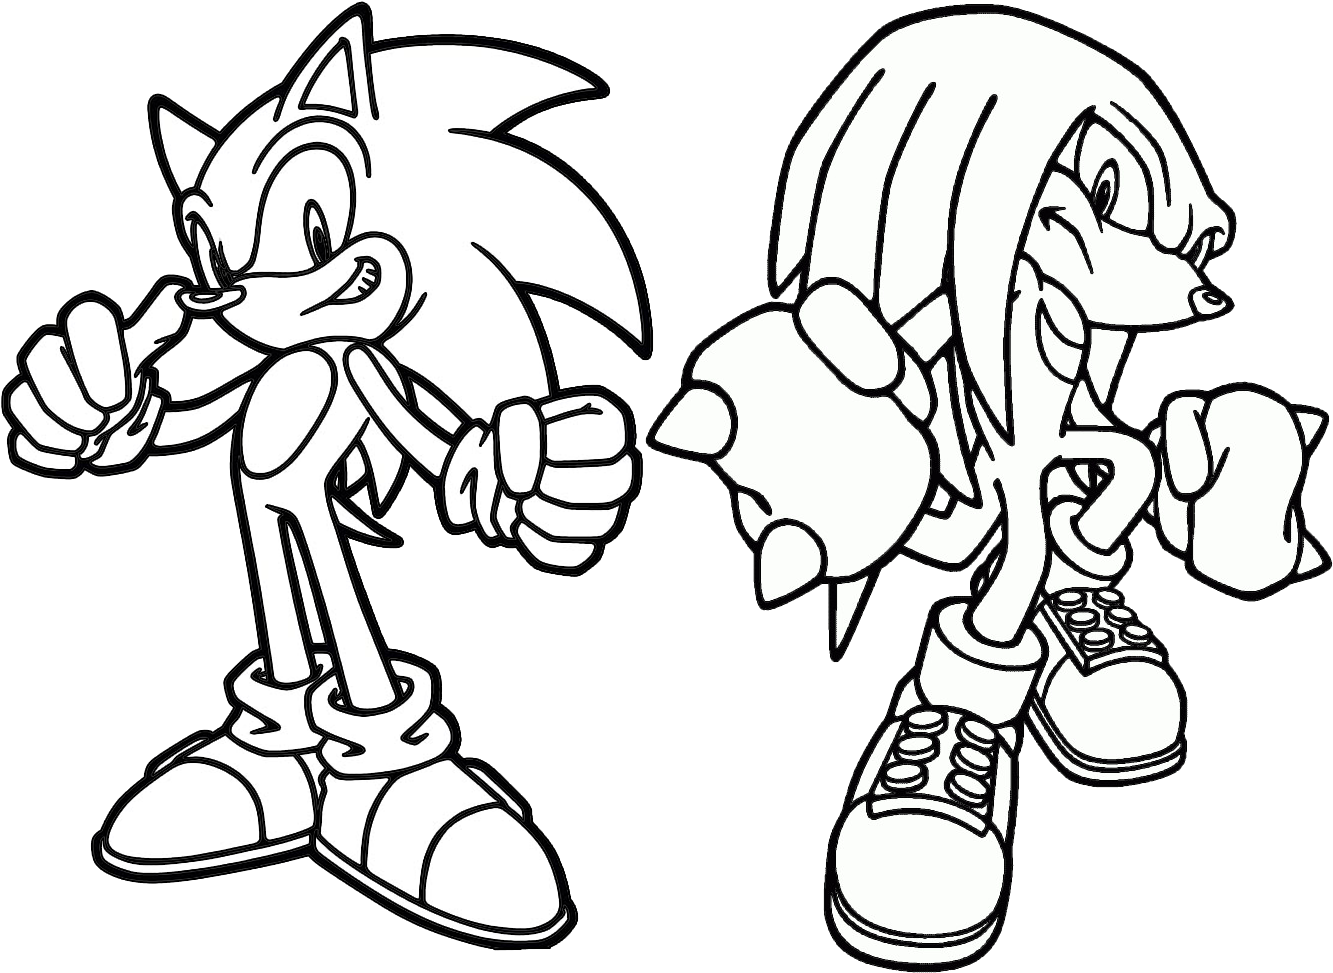 Sonic 2 Coloring Pages - sonic and knuckles coloring pages